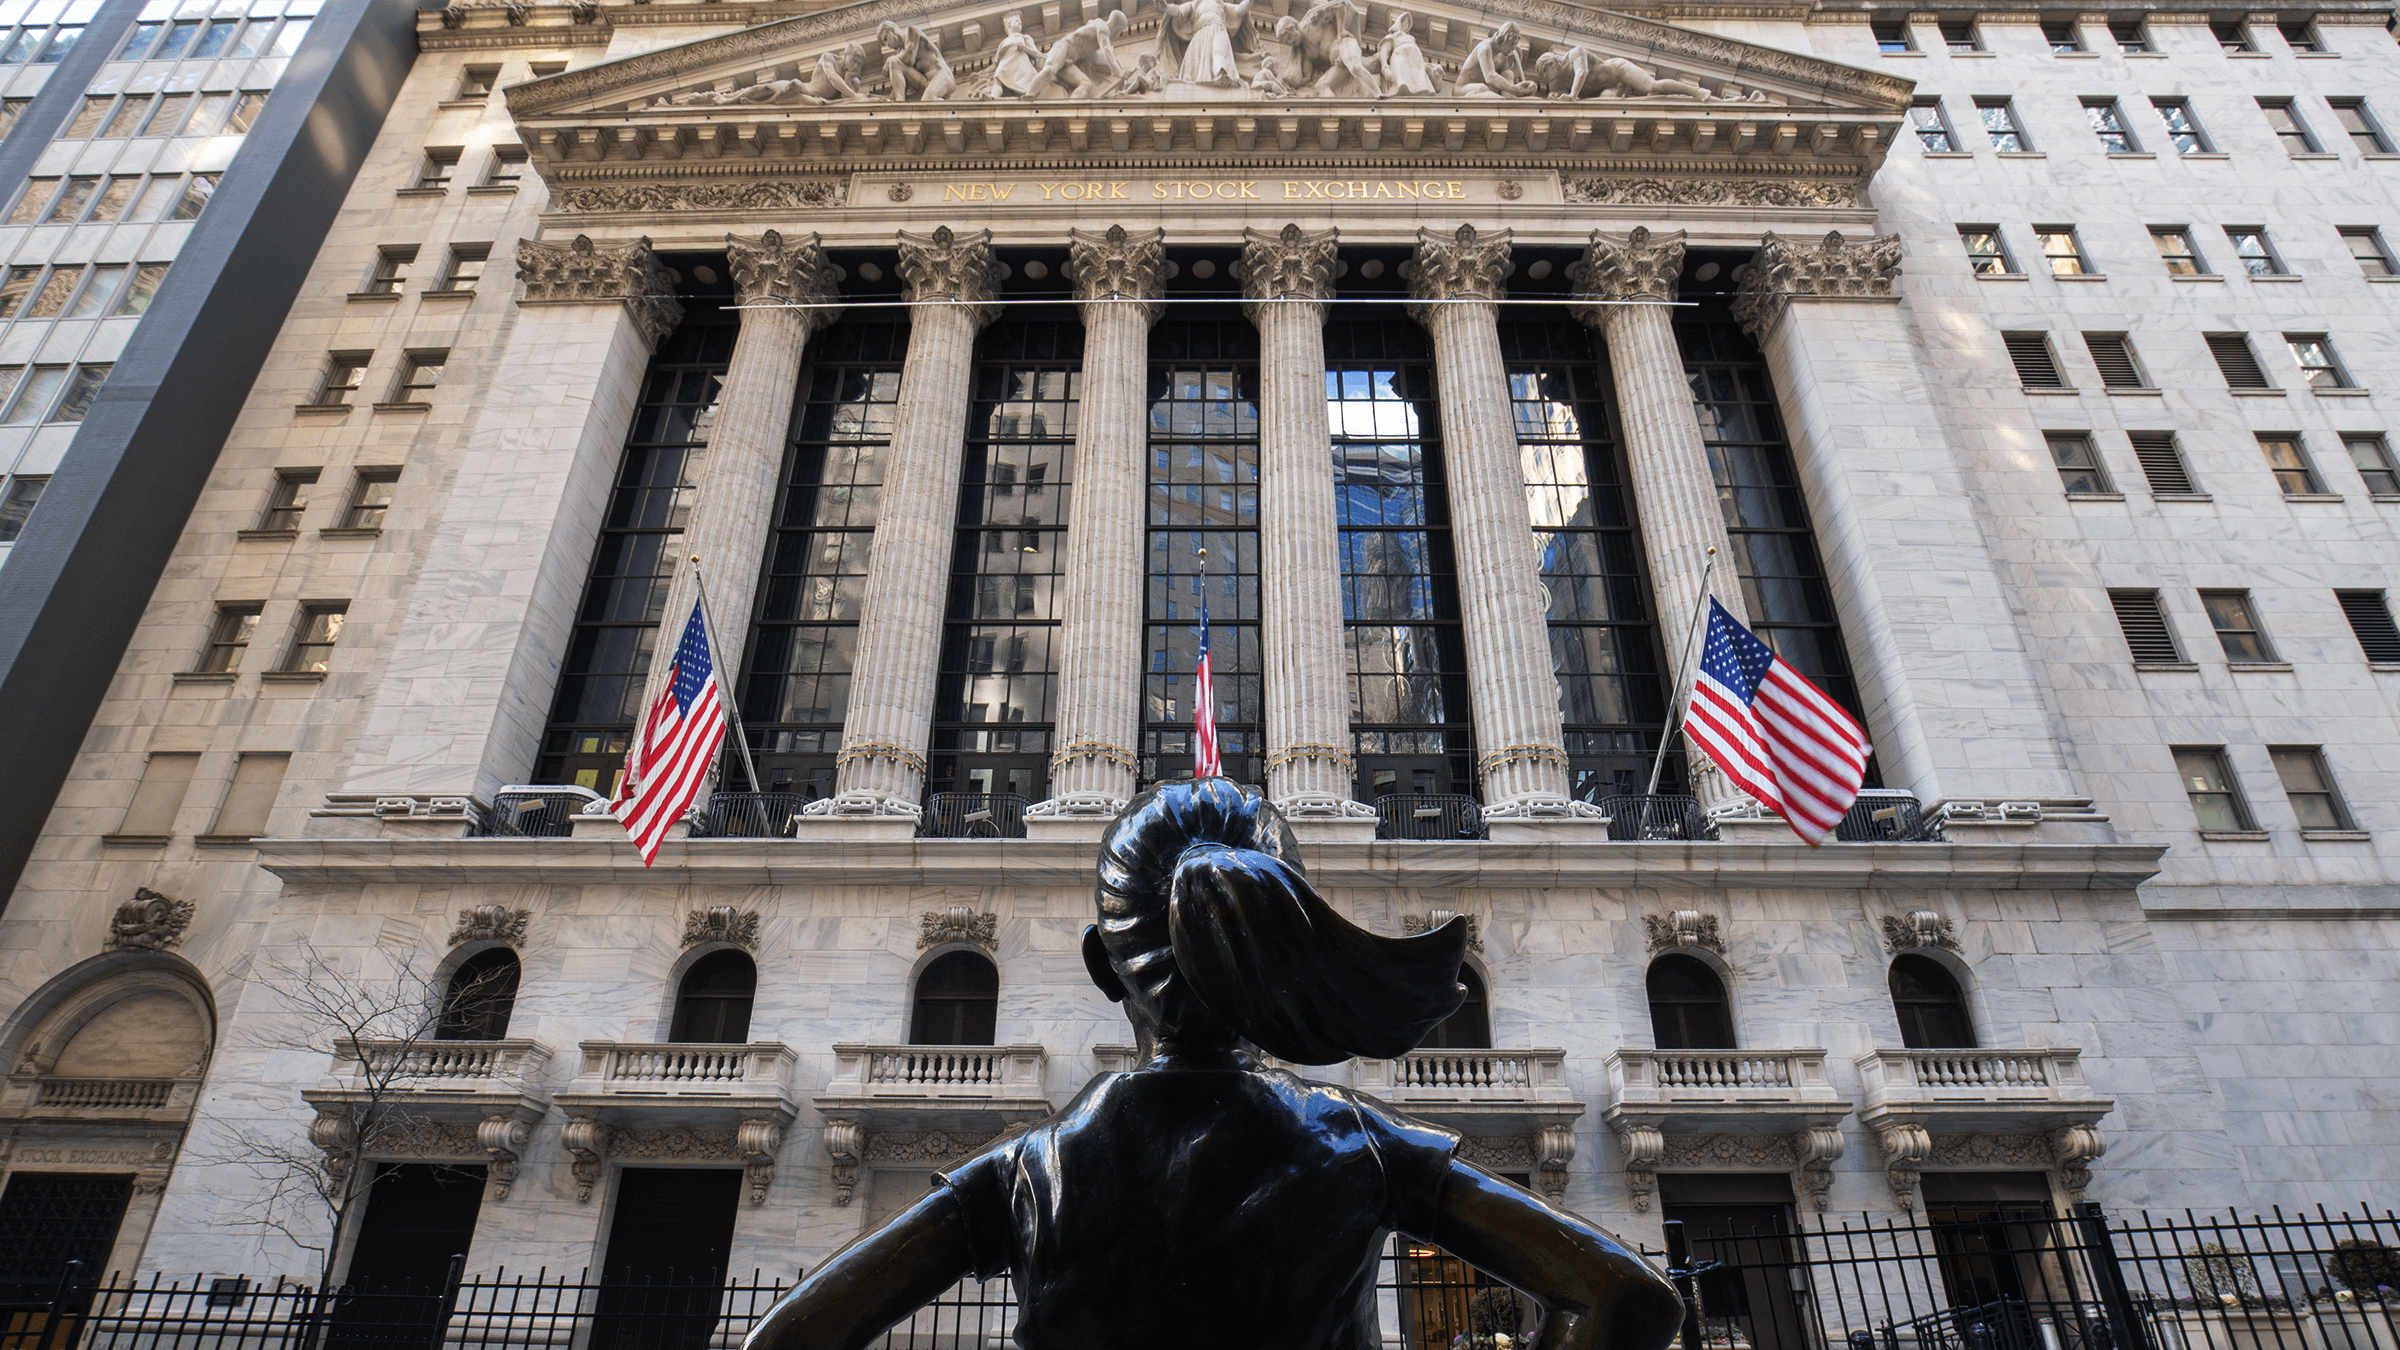 A close up picture of the front of the New York Stock Exchange building, Wall Street, NY